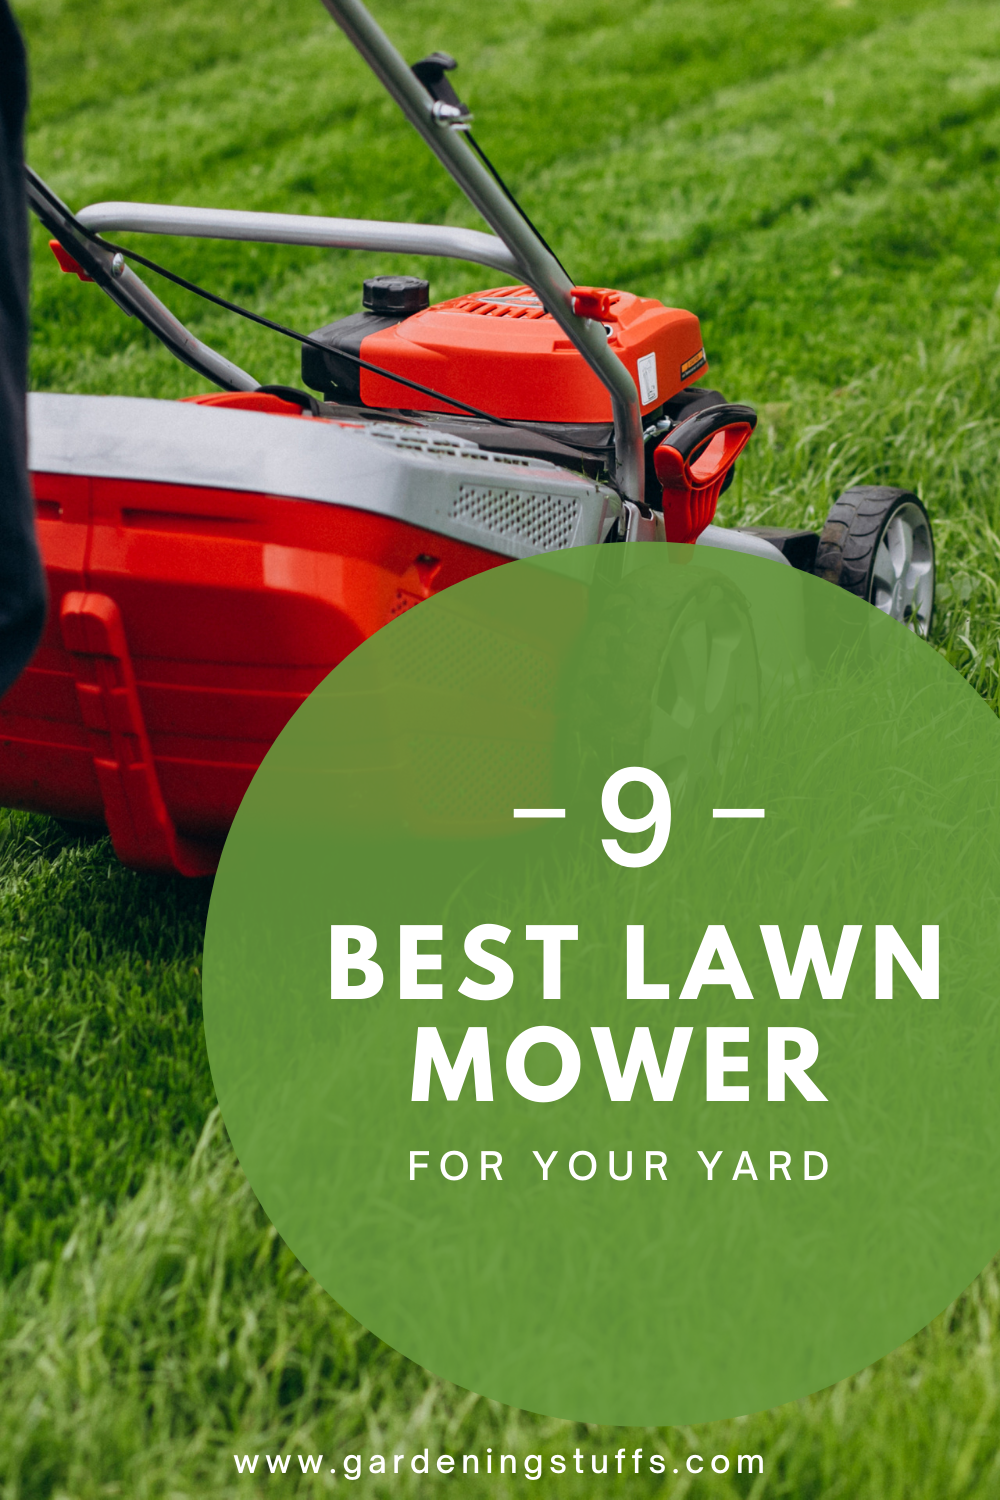 The wrong kind of mower may double the work and give you nothing but frustrations. But, the right kind will not only help keeping the lawn well-maintained but it can also help you finish mowing it quicker. So the question is, how do you find the best lawn mower when there really isn’t a one-size-fits-all kind of lawn mower? This guide will help you get the best lawn mower.